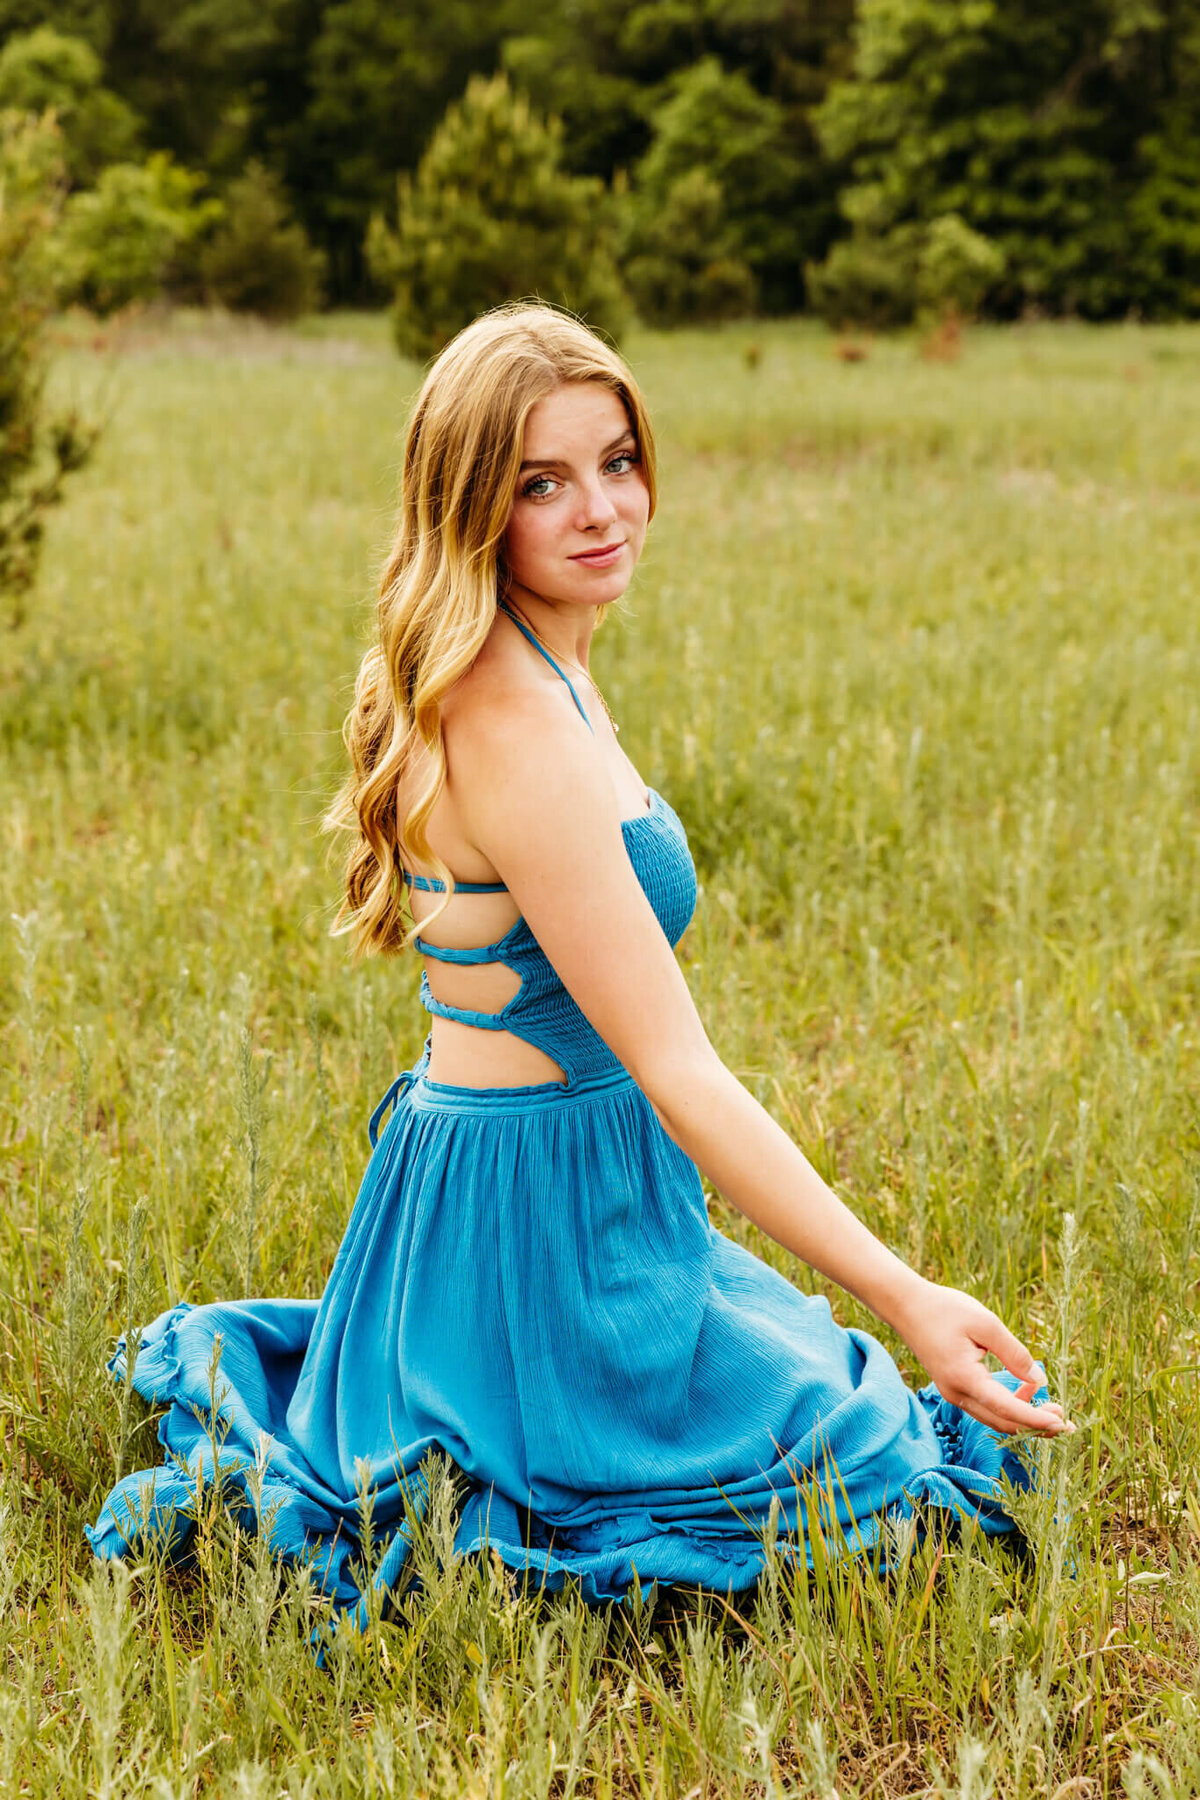 gorgeous portrait of a blonde high school girl in a teal dress kneeling in a field as she plays with the grass captured by Ashley Kalbus Photography